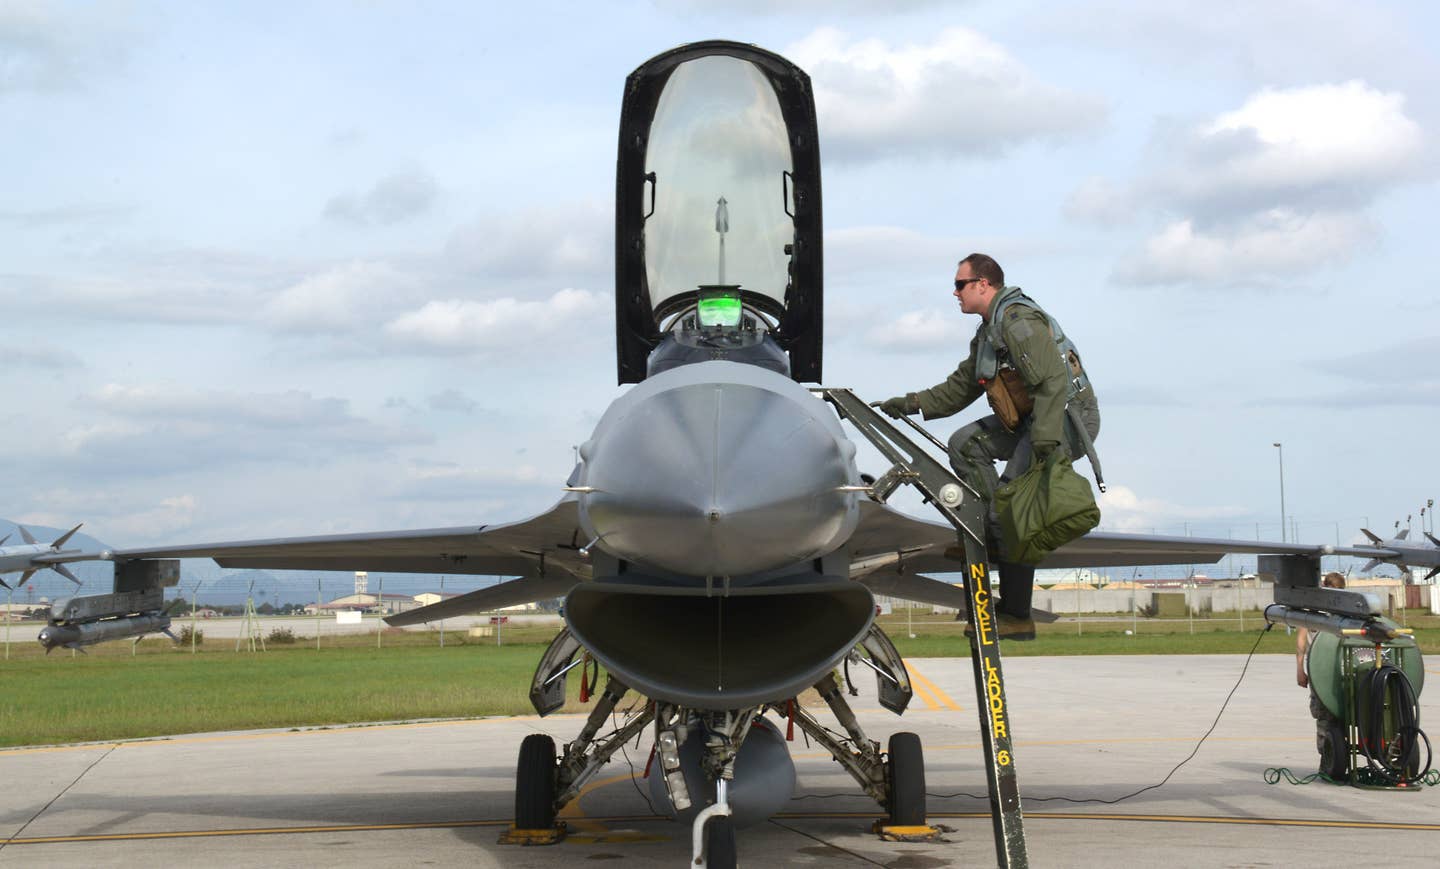 A US Air Force pilot climbs into the cockpit of an F-16 at Aviano Air Base in Italy using a typical external boarding ladder. <em>USAF</em>